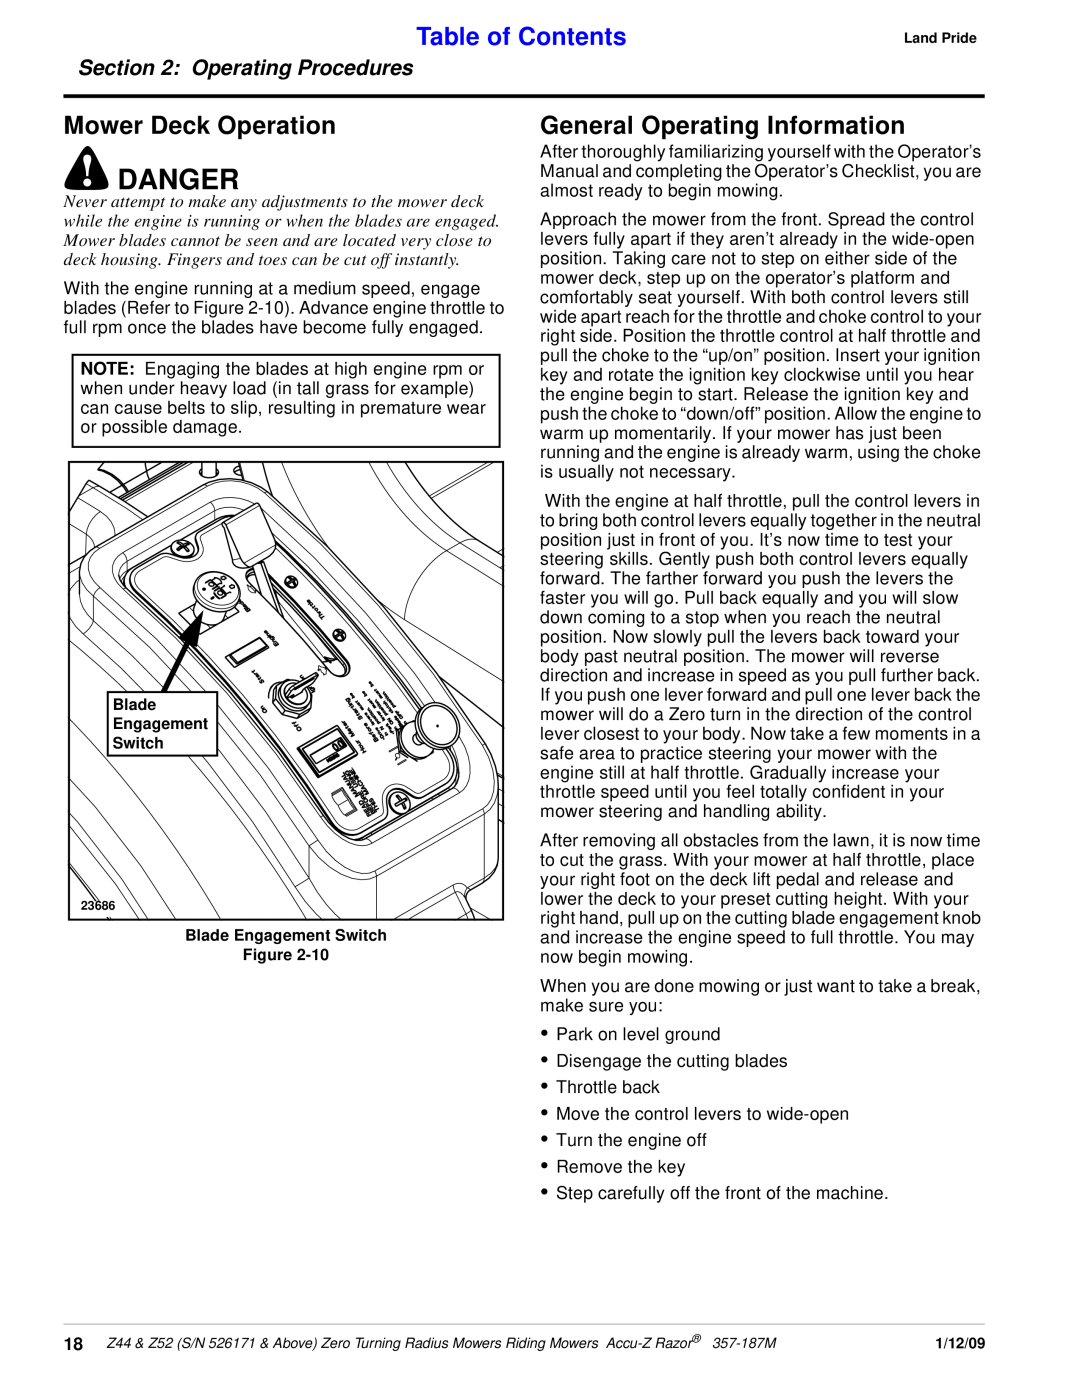 Land Pride 357-187M Mower Deck Operation, General Operating Information, Danger, Table of Contents, Operating Procedures 